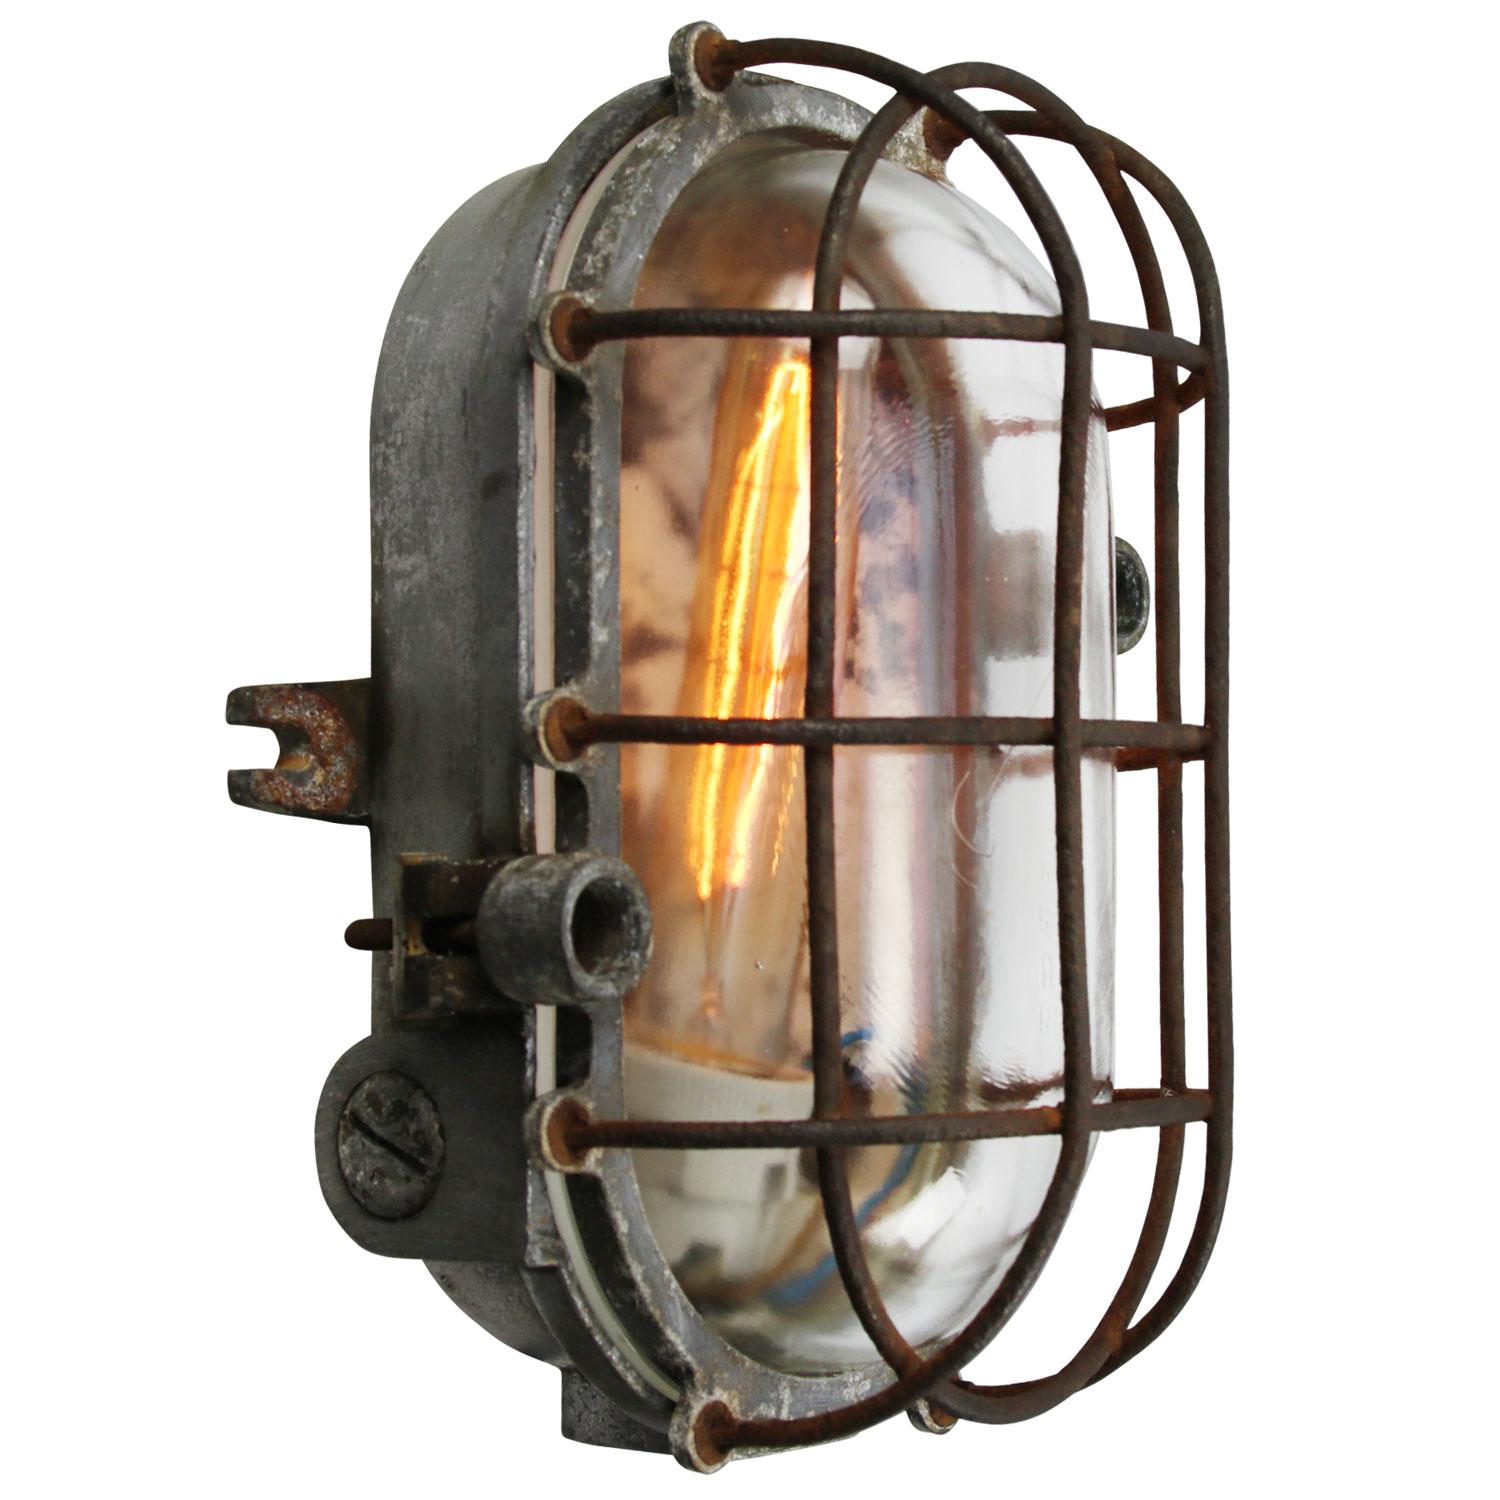 Industrial wall or ceiling lamp
grey cast aluminum, clear glass

Weight: 2.90 kg / 6.4 lb

Priced per individual item. All lamps have been made suitable by international standards for incandescent light bulbs, energy-efficient and LED bulbs.